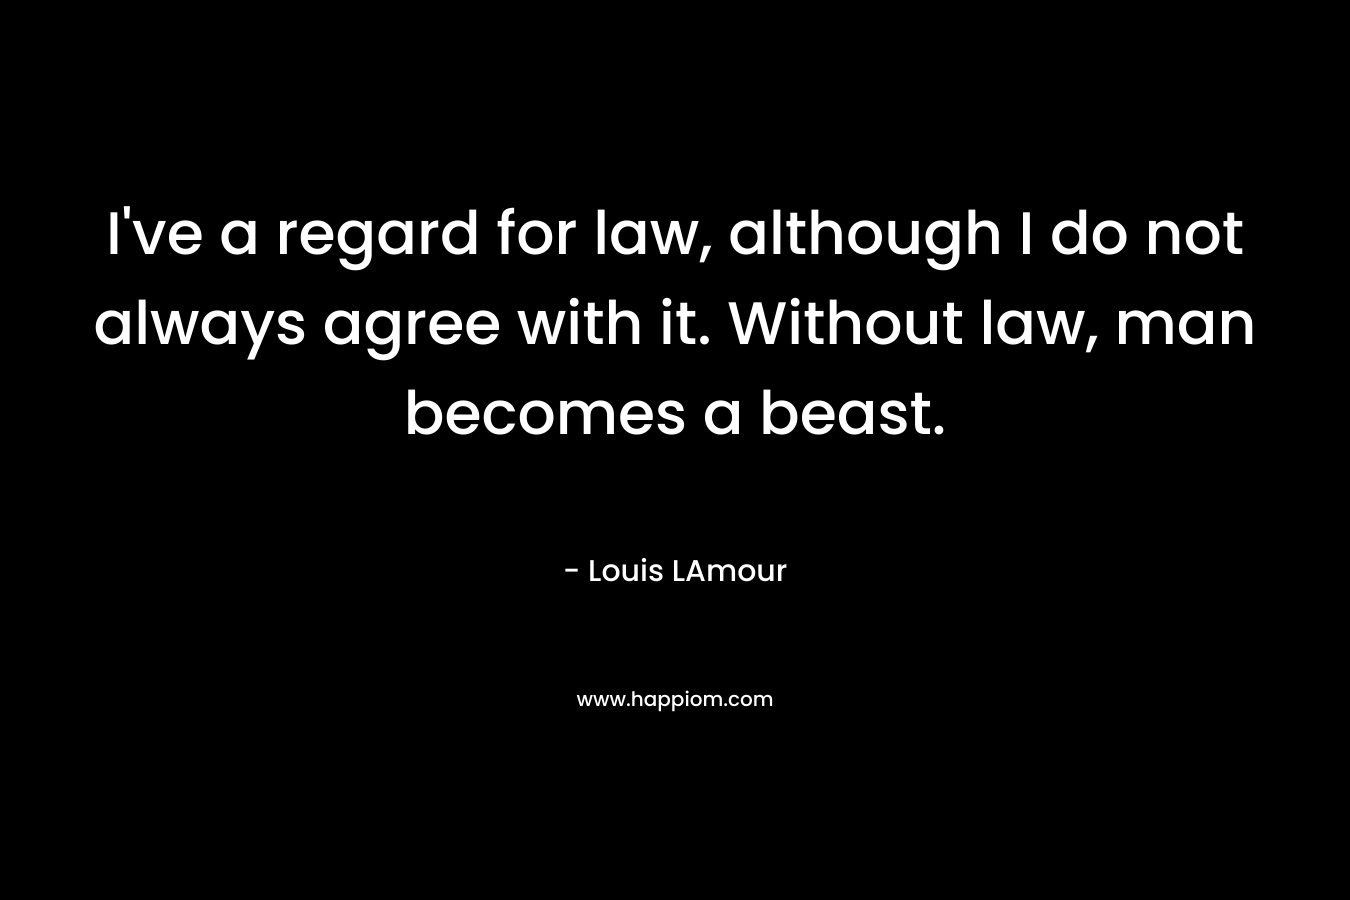 I’ve a regard for law, although I do not always agree with it. Without law, man becomes a beast. – Louis LAmour